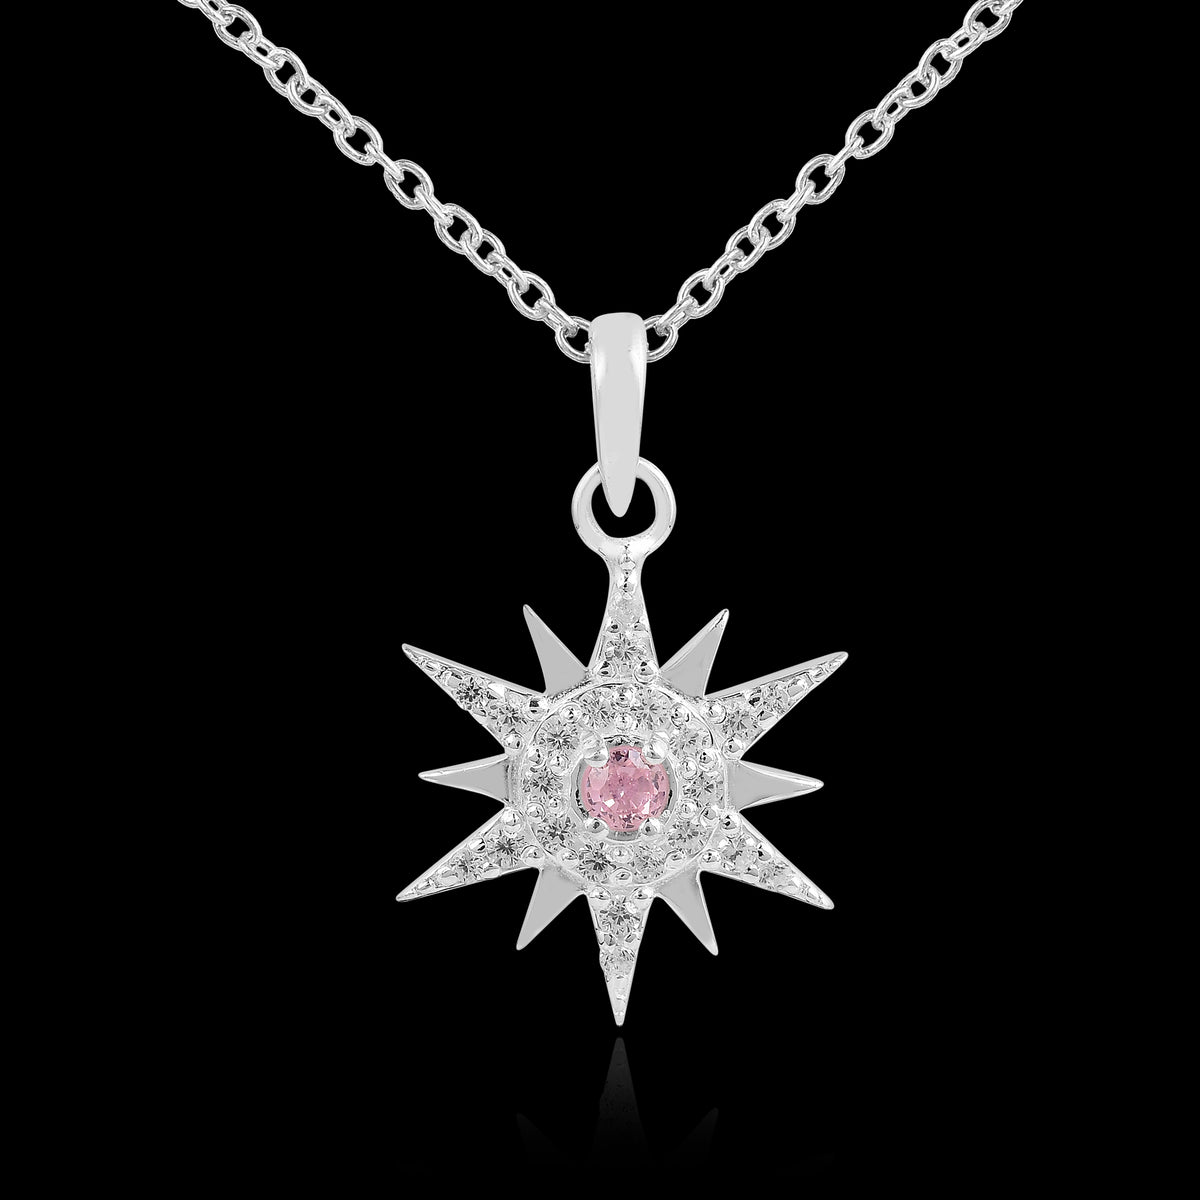 925 Sterling Silver Star Cubic Zirconia Pendant with Chain Gift for Her